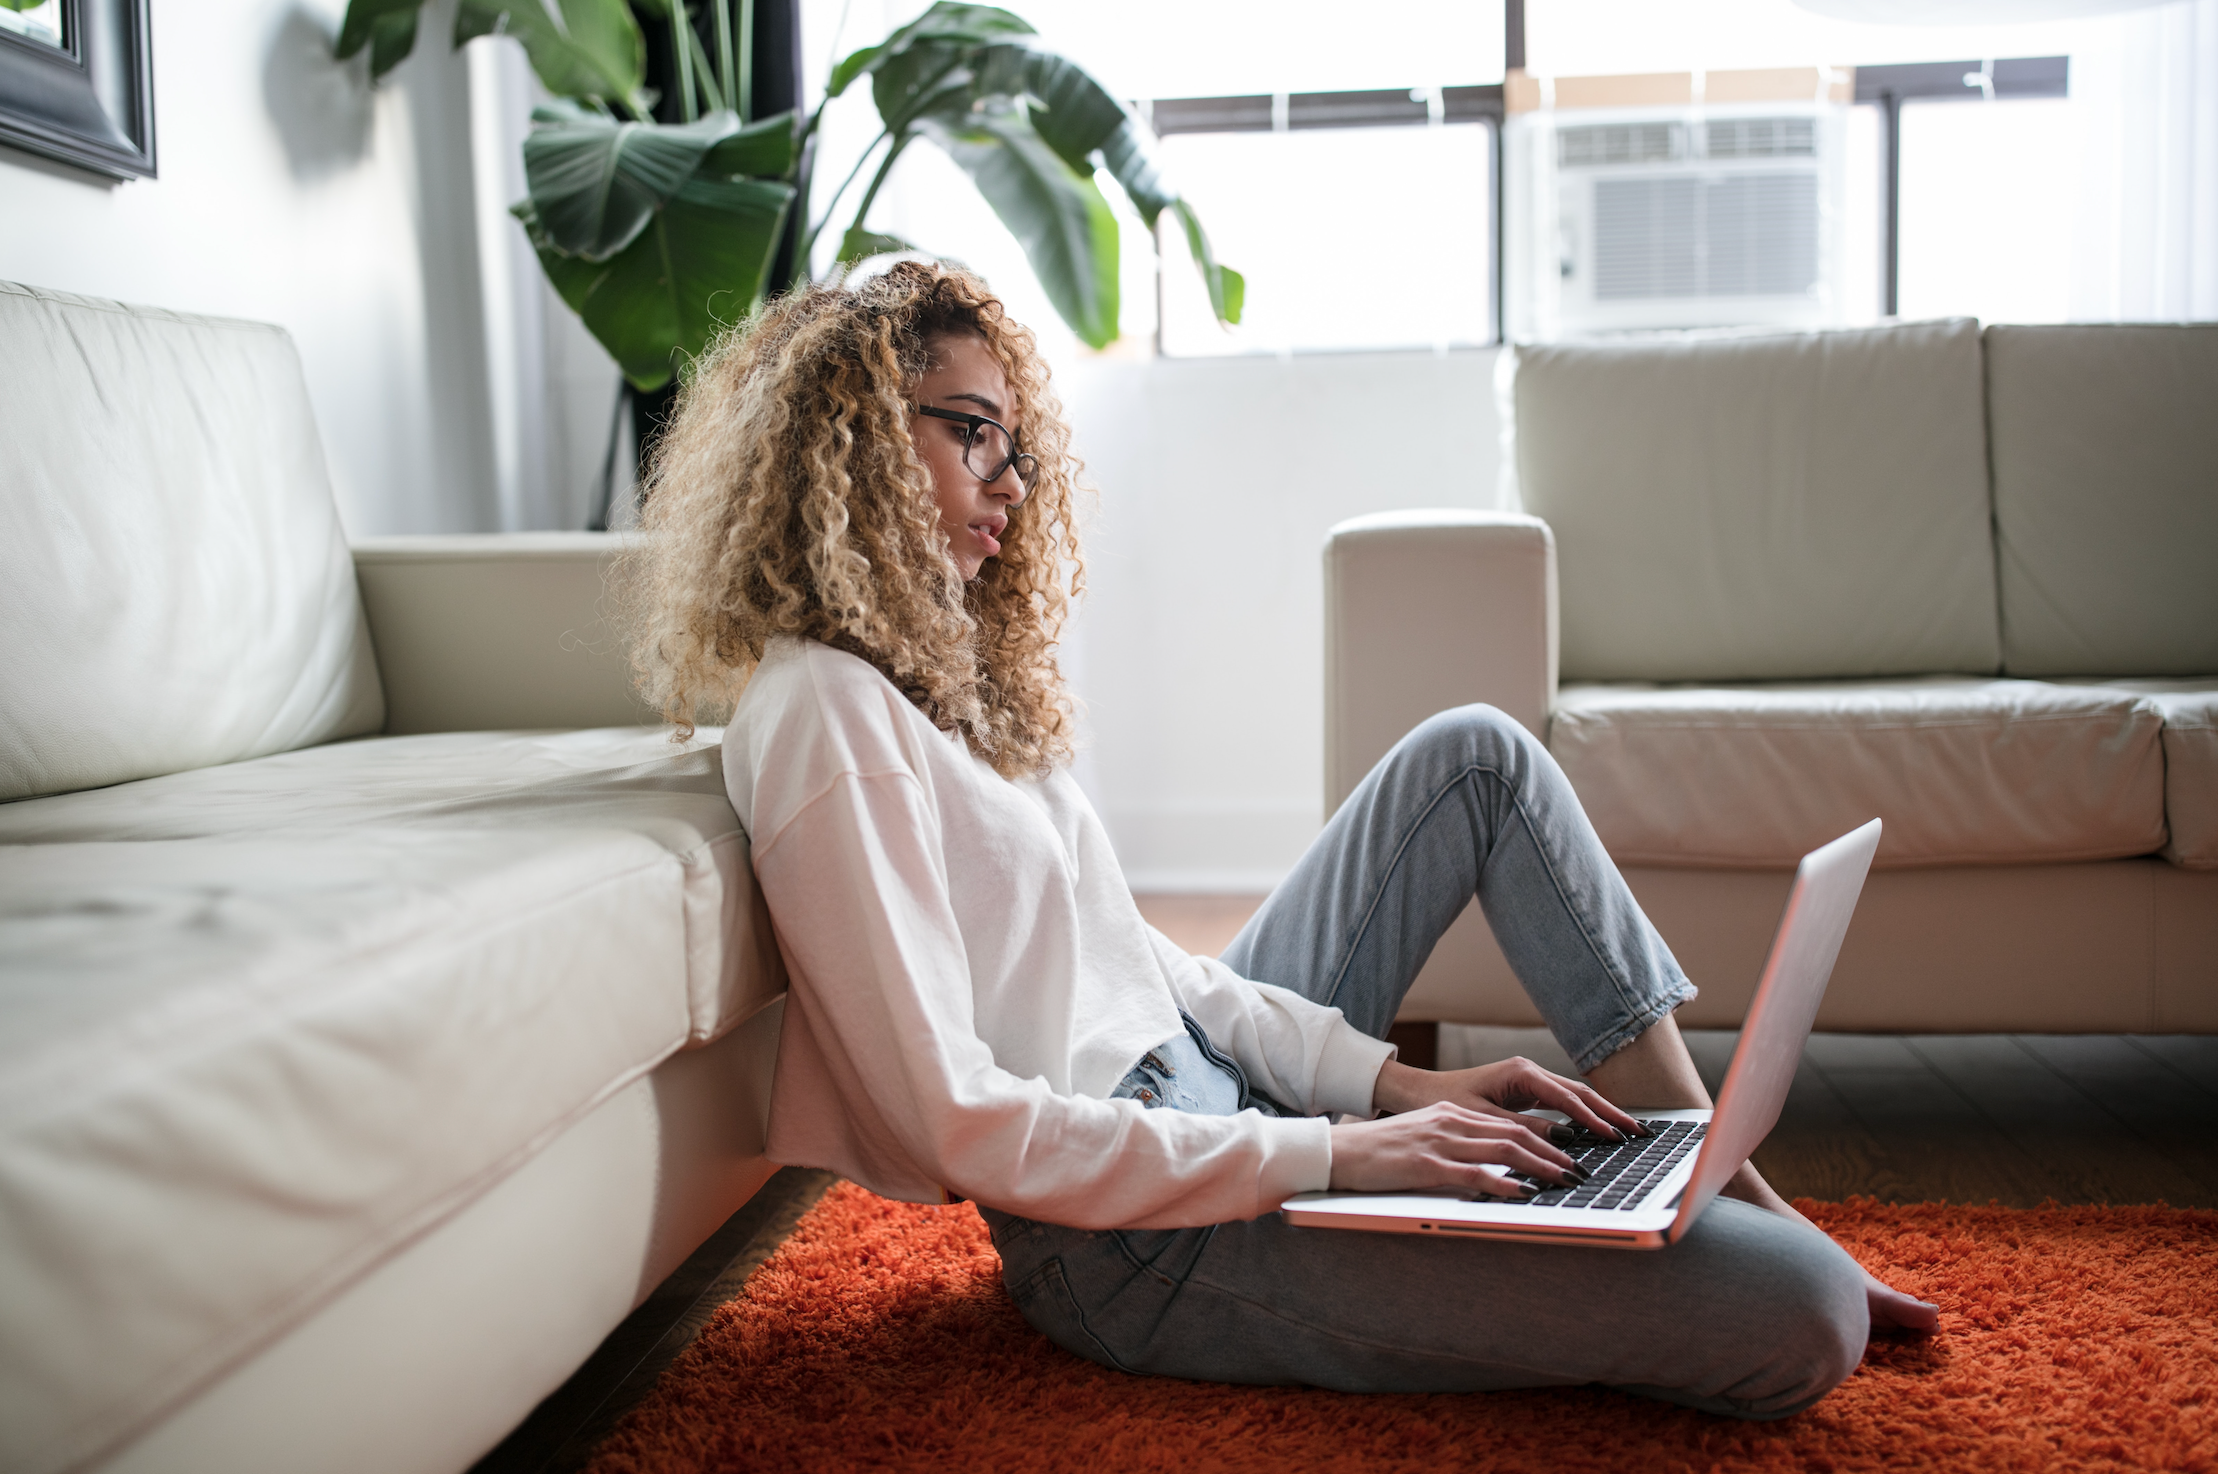 Woman with curly hair working on her laptop